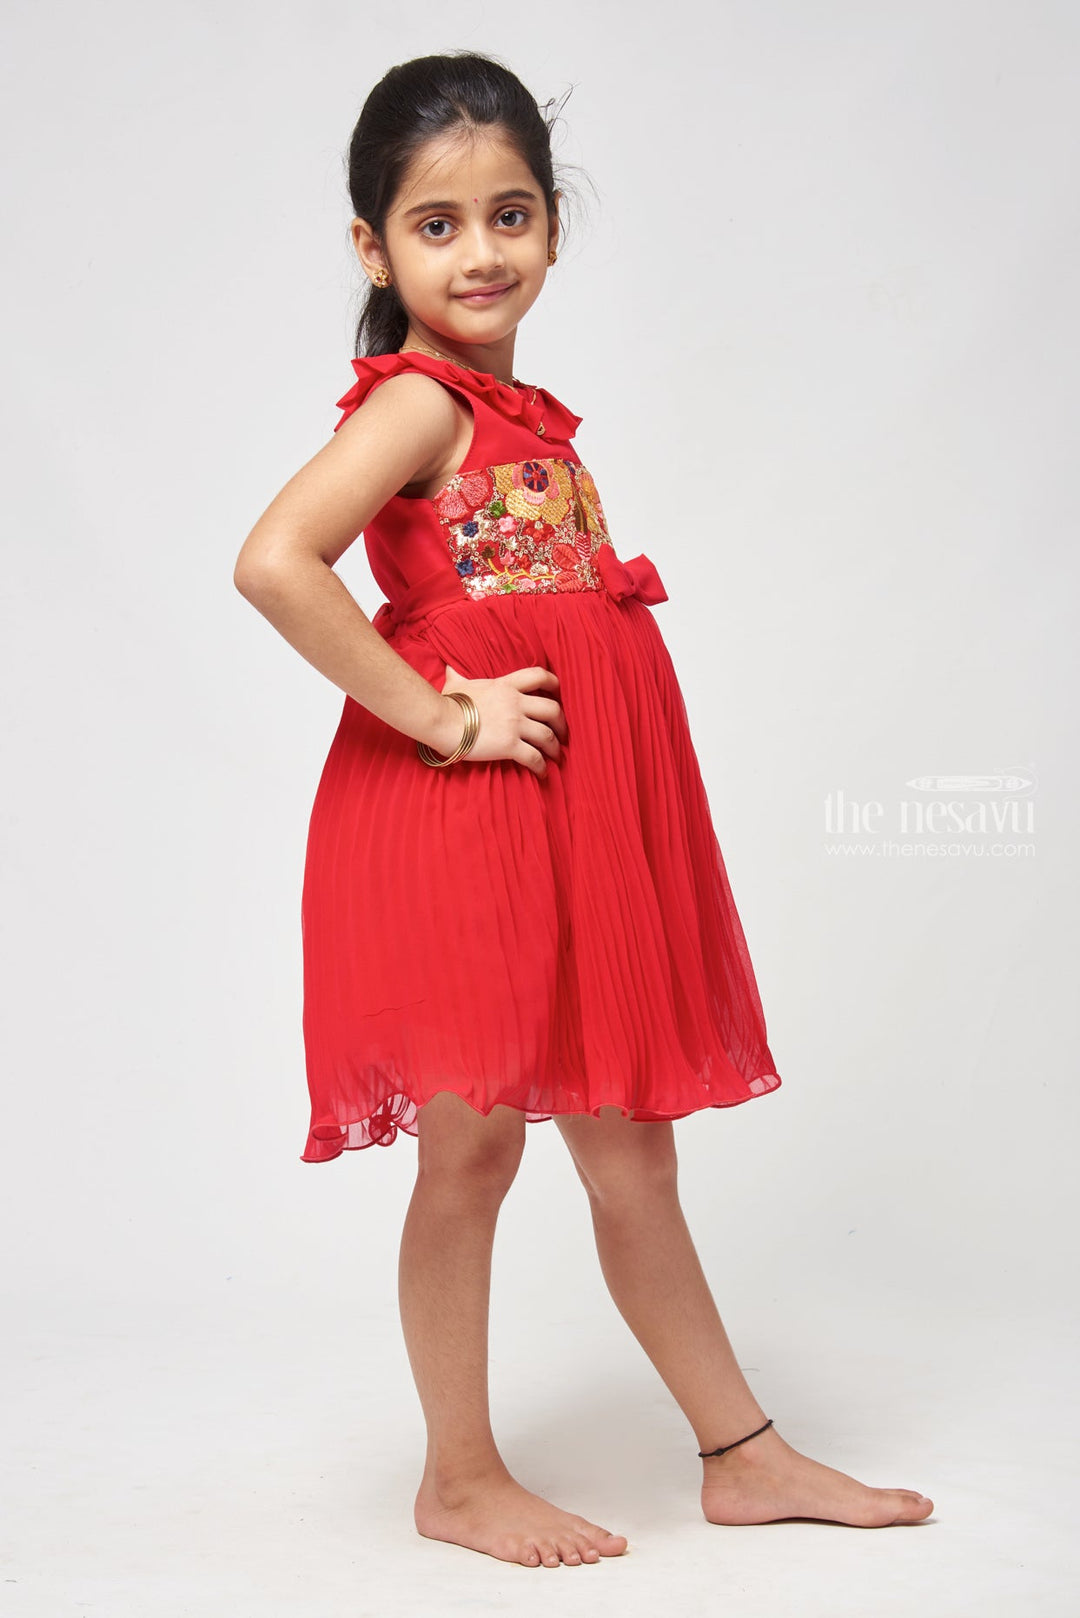 The Nesavu Girls Fancy Frock Embellished Ballroom Style Frock with Sparkle Accents for Girls Nesavu Shift Dress For Kids - Fancy Kids Frock Elegance For Photoshoots | The Nesavu